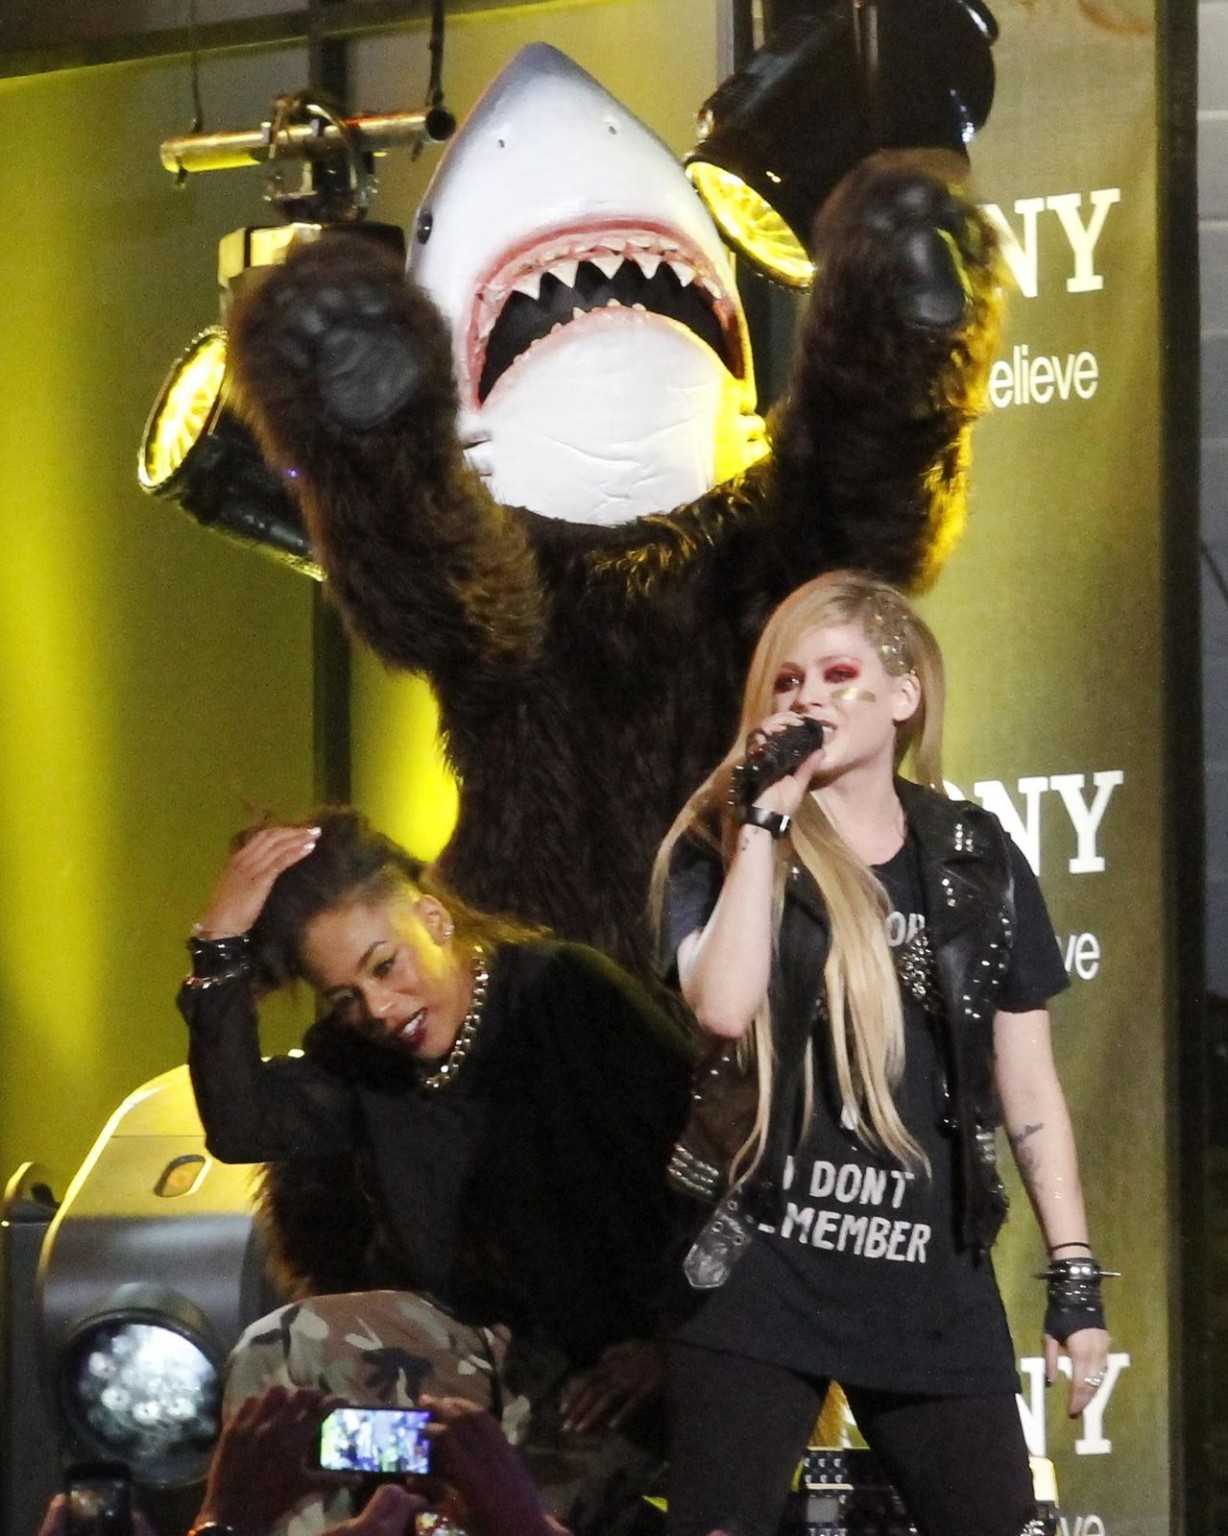 Avril Lavigne showing off her spiky bra at the 'Jimmy Kimmel Live' show in Holly #75218165